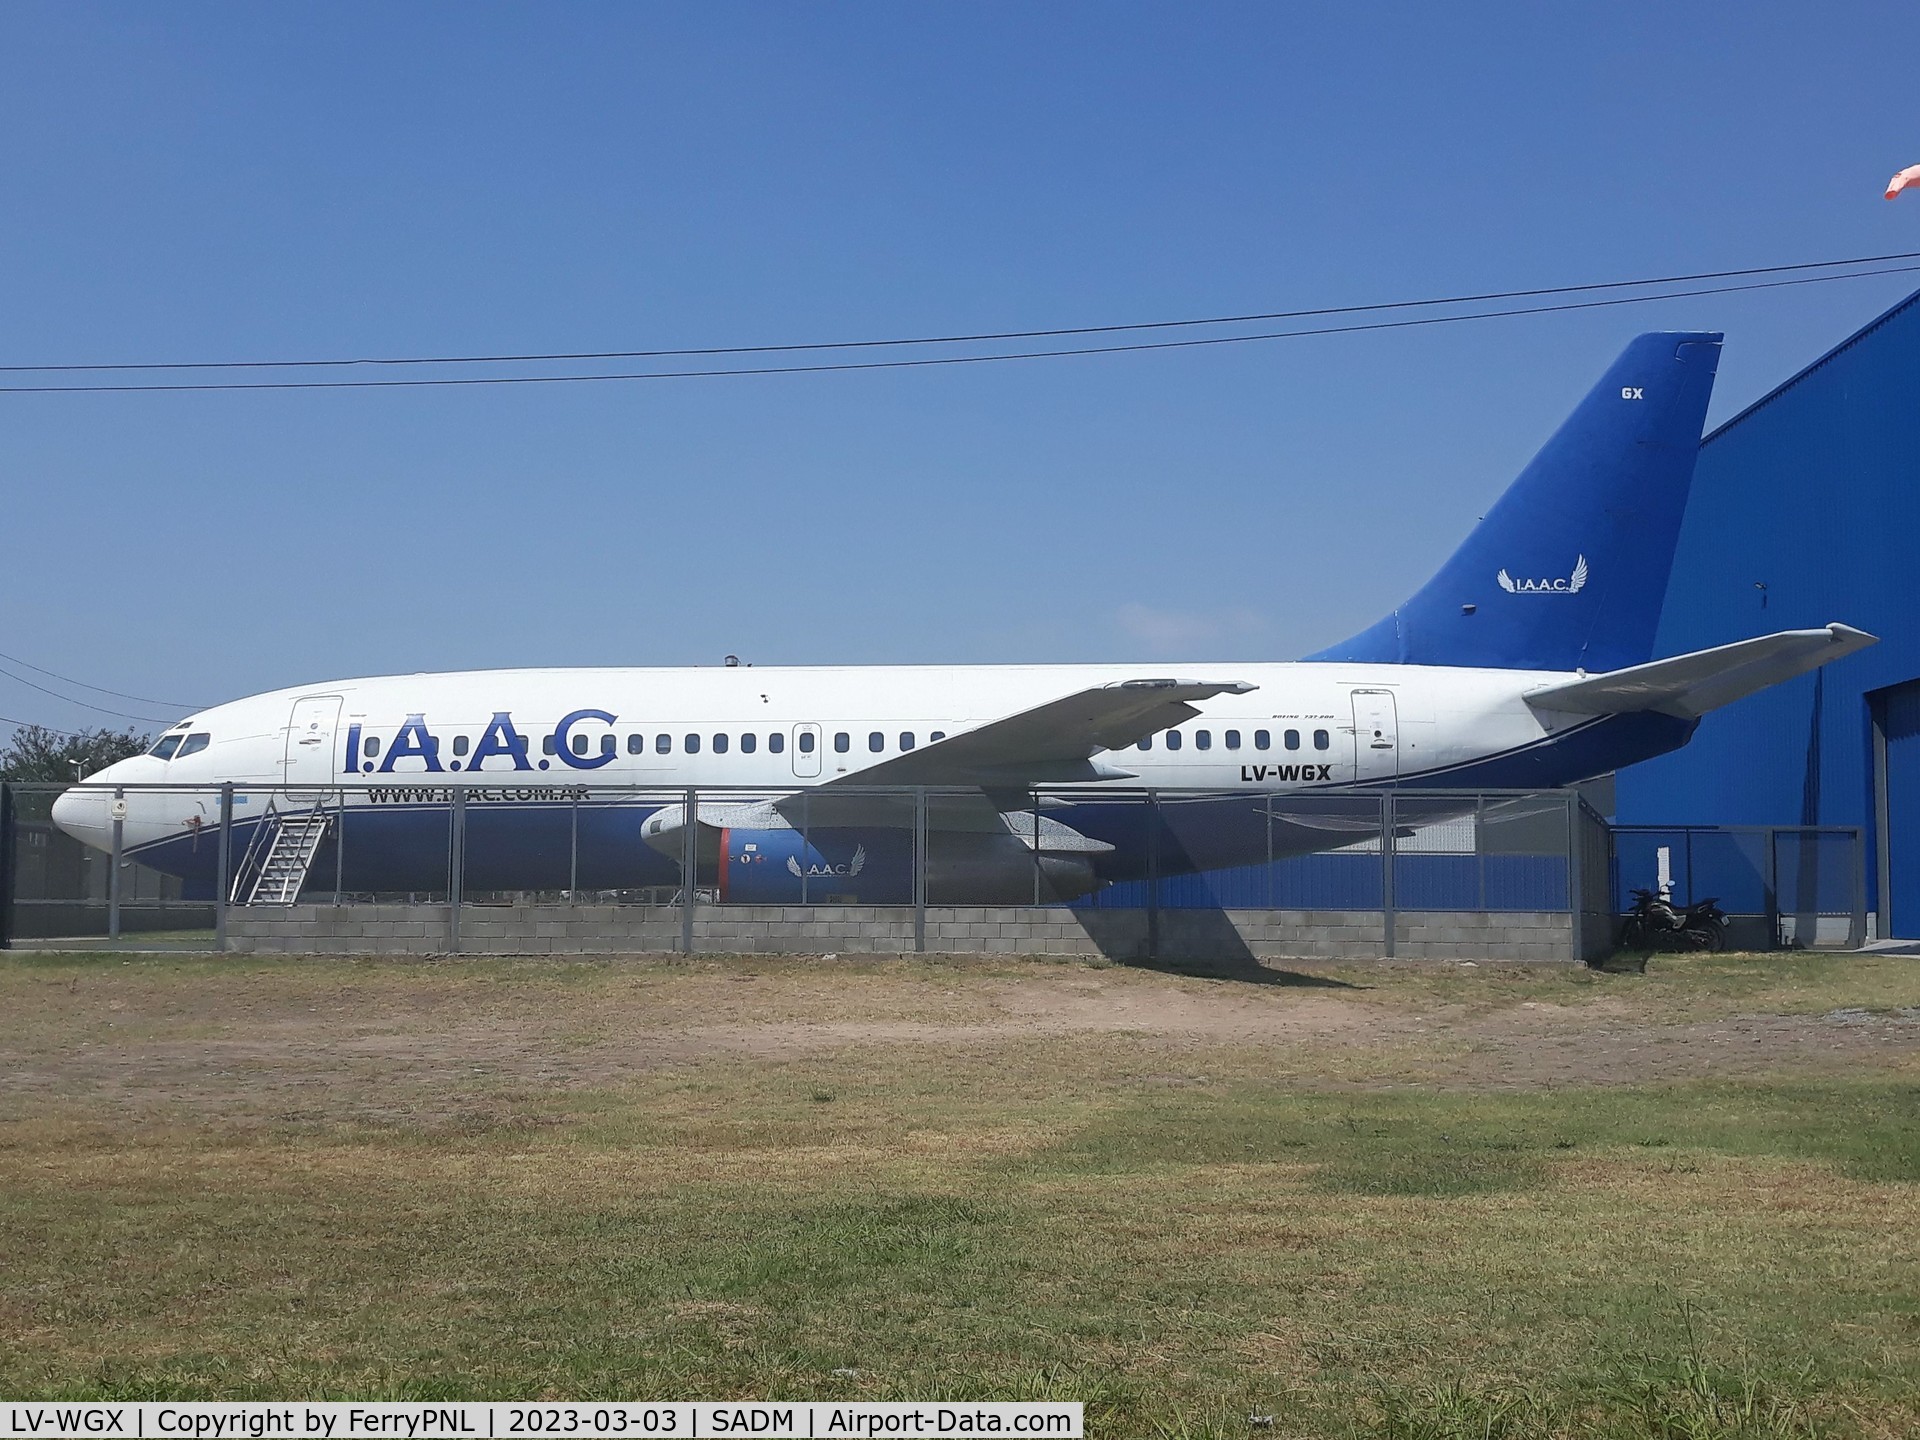 LV-WGX, 1977 Boeing 737-2P6 C/N 21358, IAAC uses this former AR B732 at its institute at Moron Airport